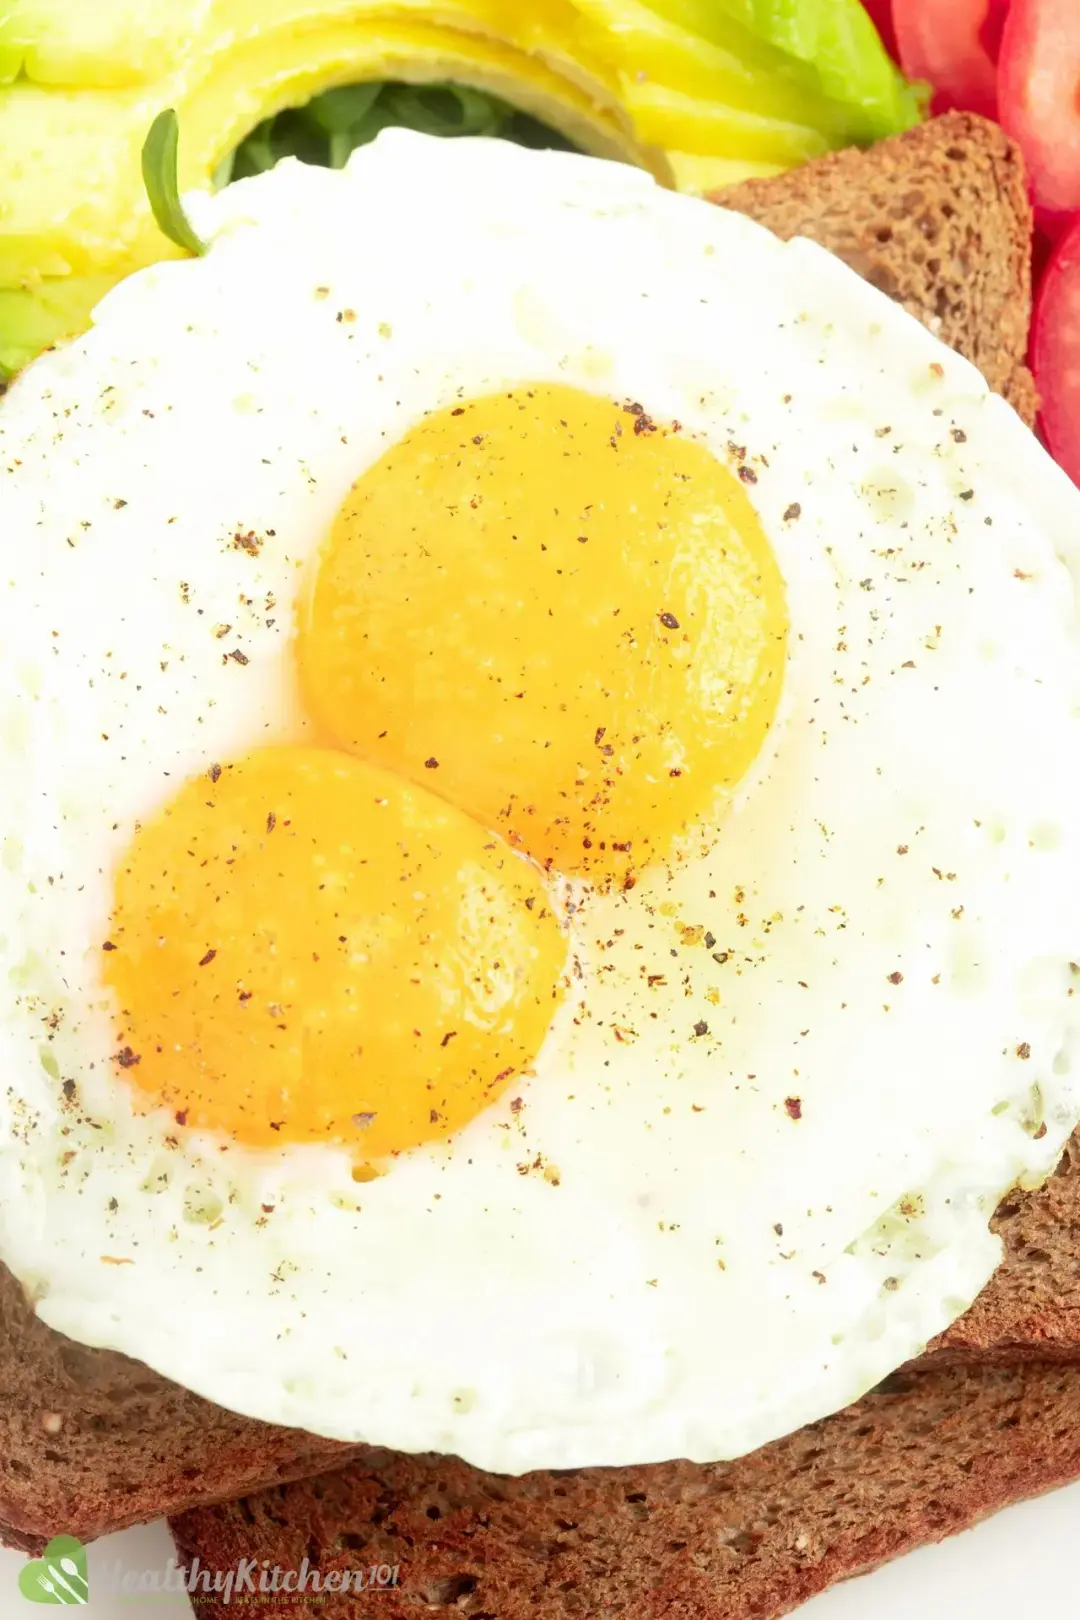 Calories in sunny side up egg